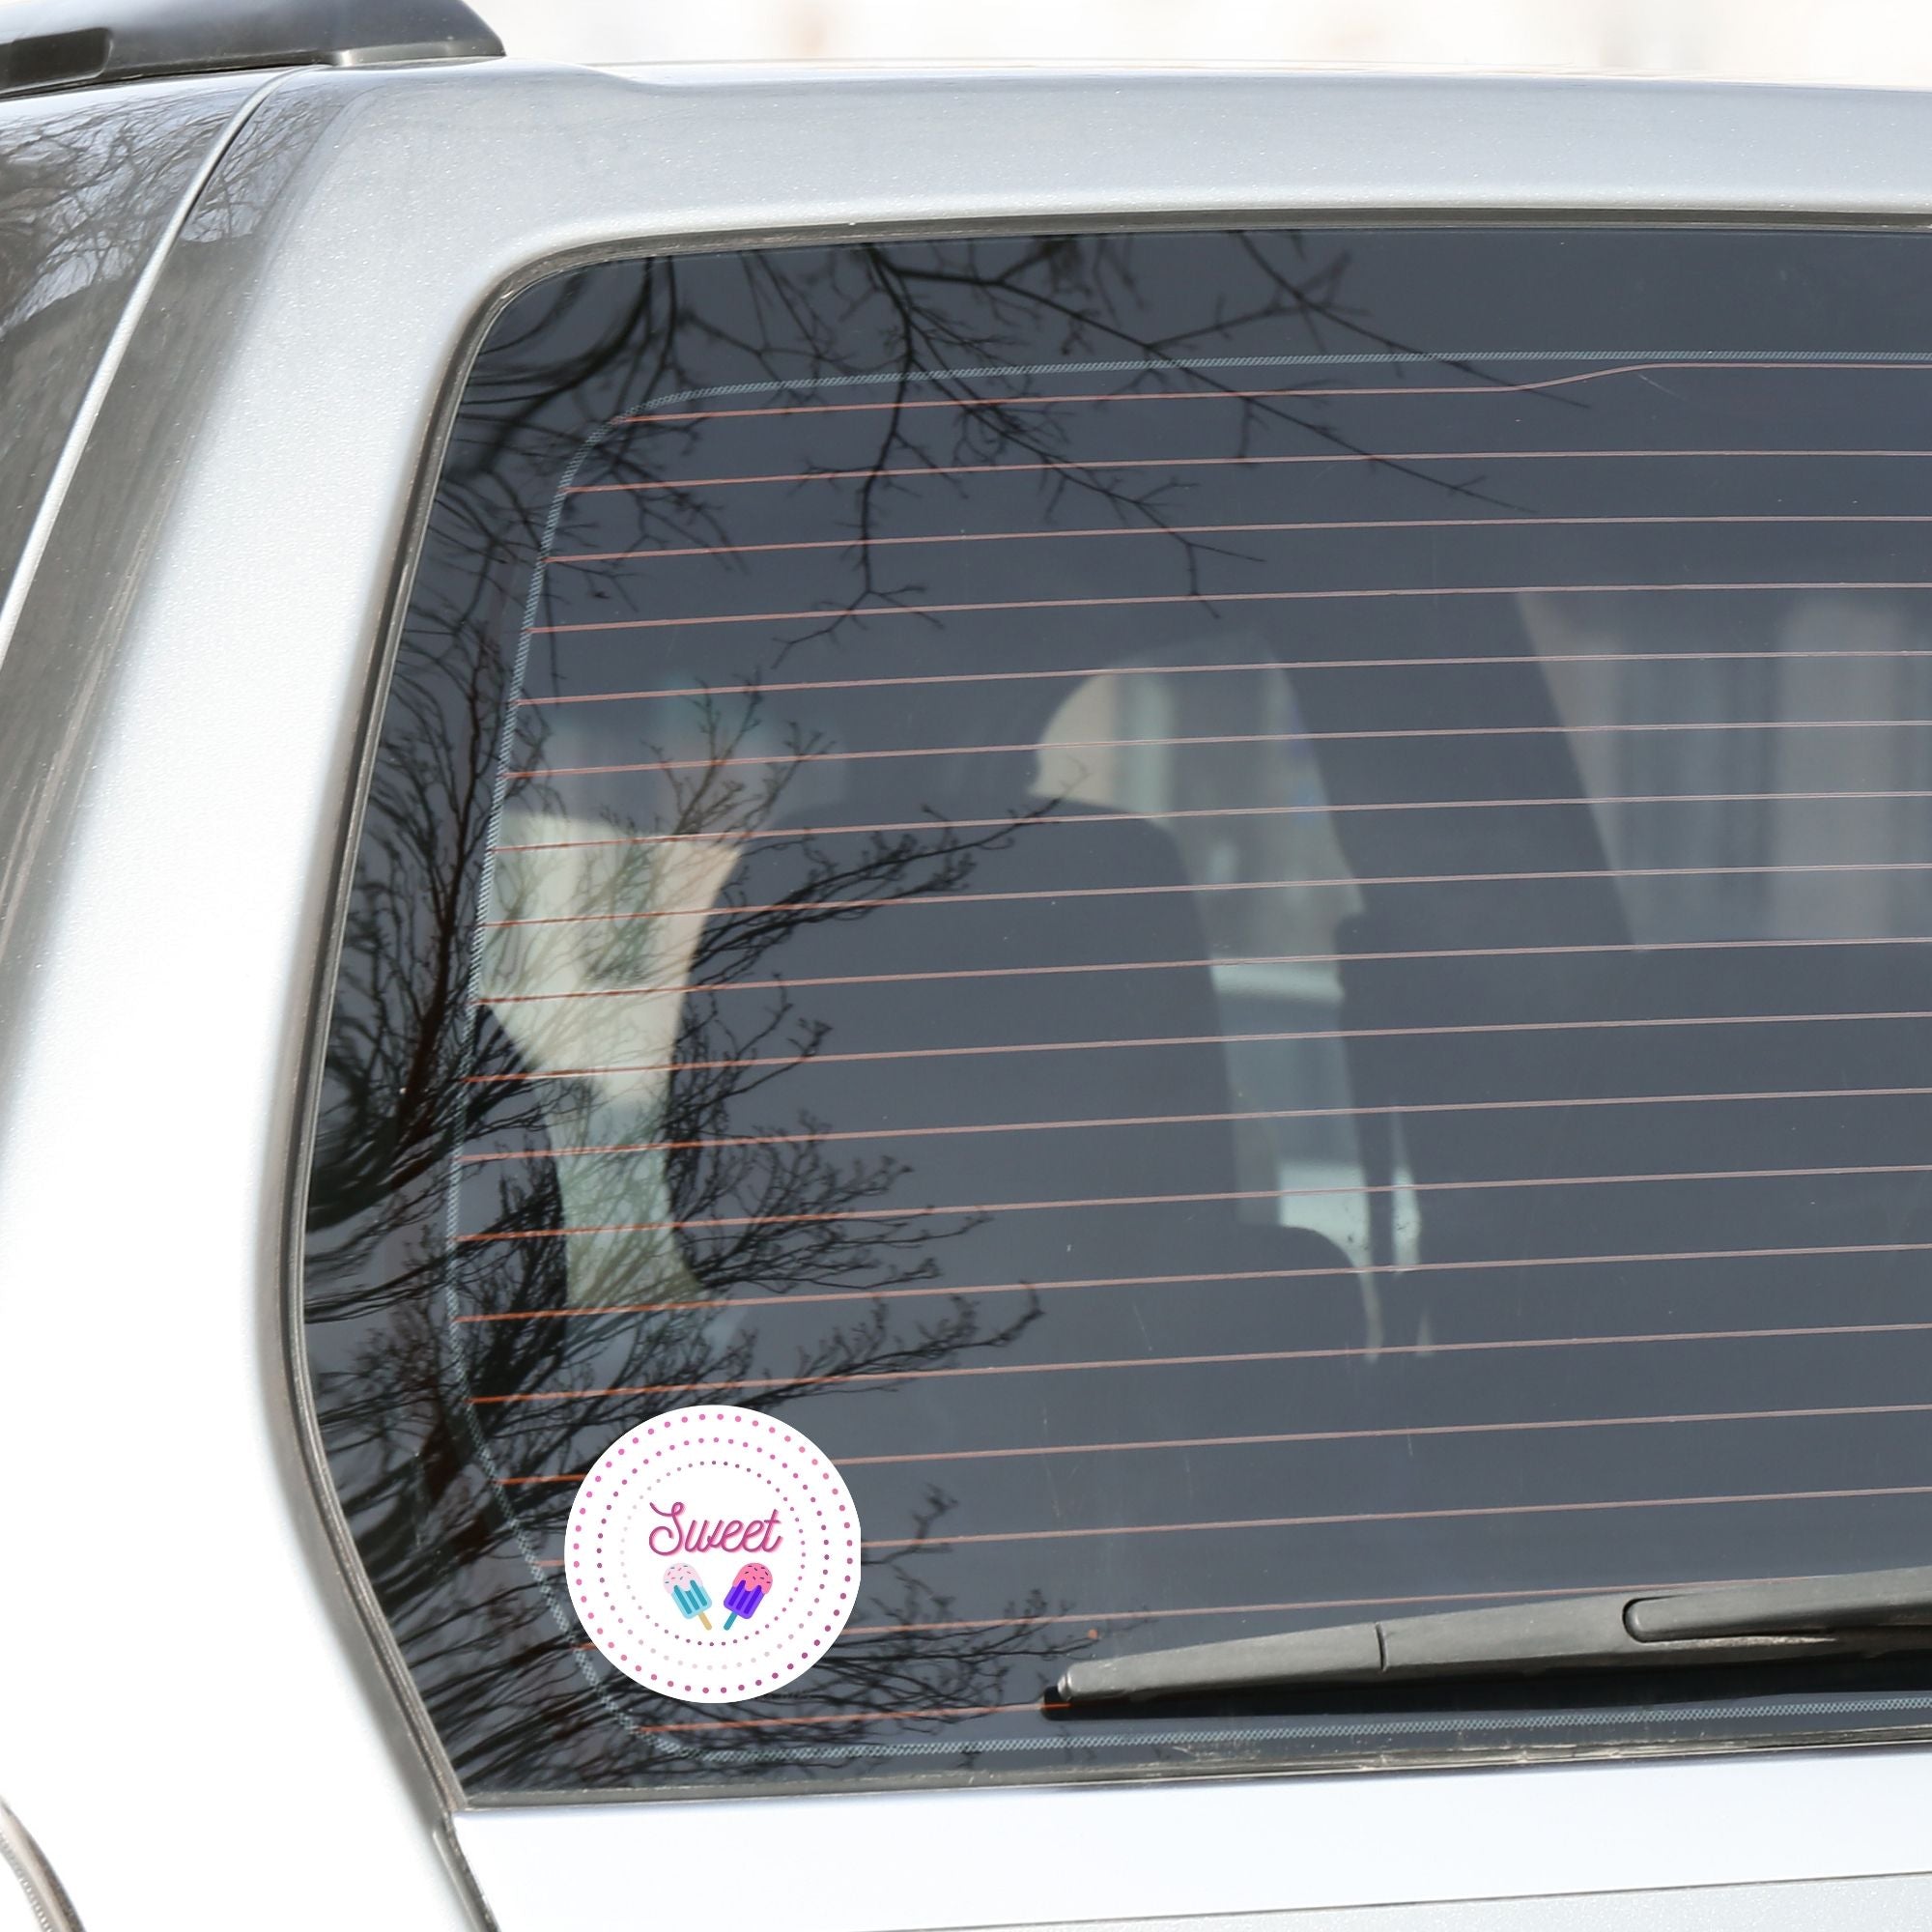 Sweet as Ice Cream! This round individual die-cut sticker has the word Sweet with two ice cream bars in the center surrounded by pink and purple circular dots. This makes a great gift for your sweetie! This image shows the Sweet - Ice Cream die-cut sticker on the back window of a car.